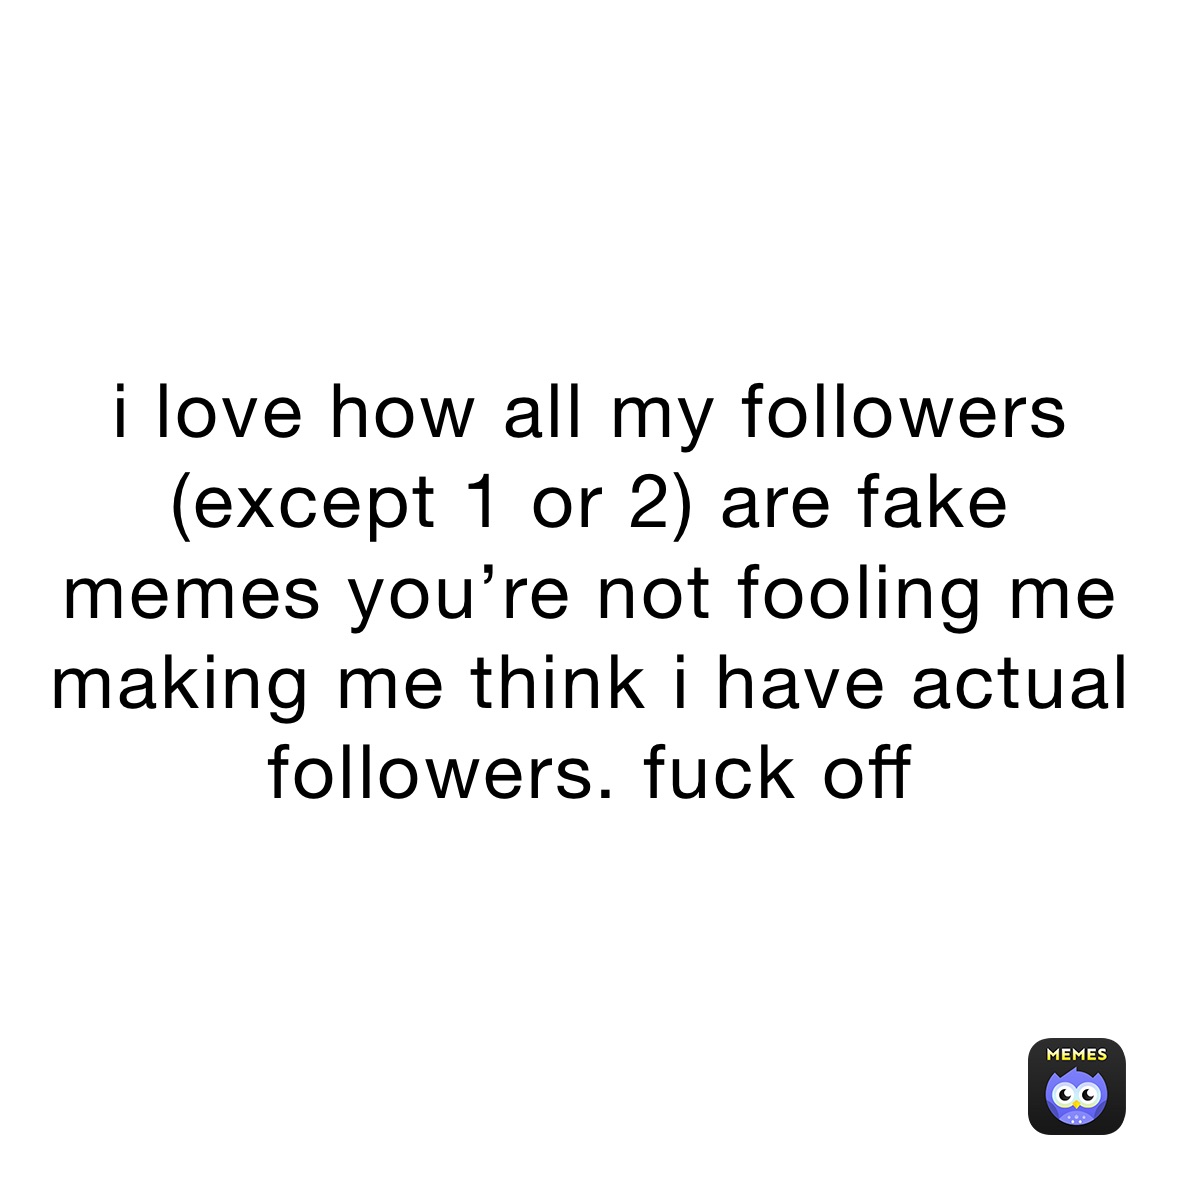 i love how all my followers (except 1 or 2) are fake
memes you’re not fooling me making me think i have actual followers. fuck off 